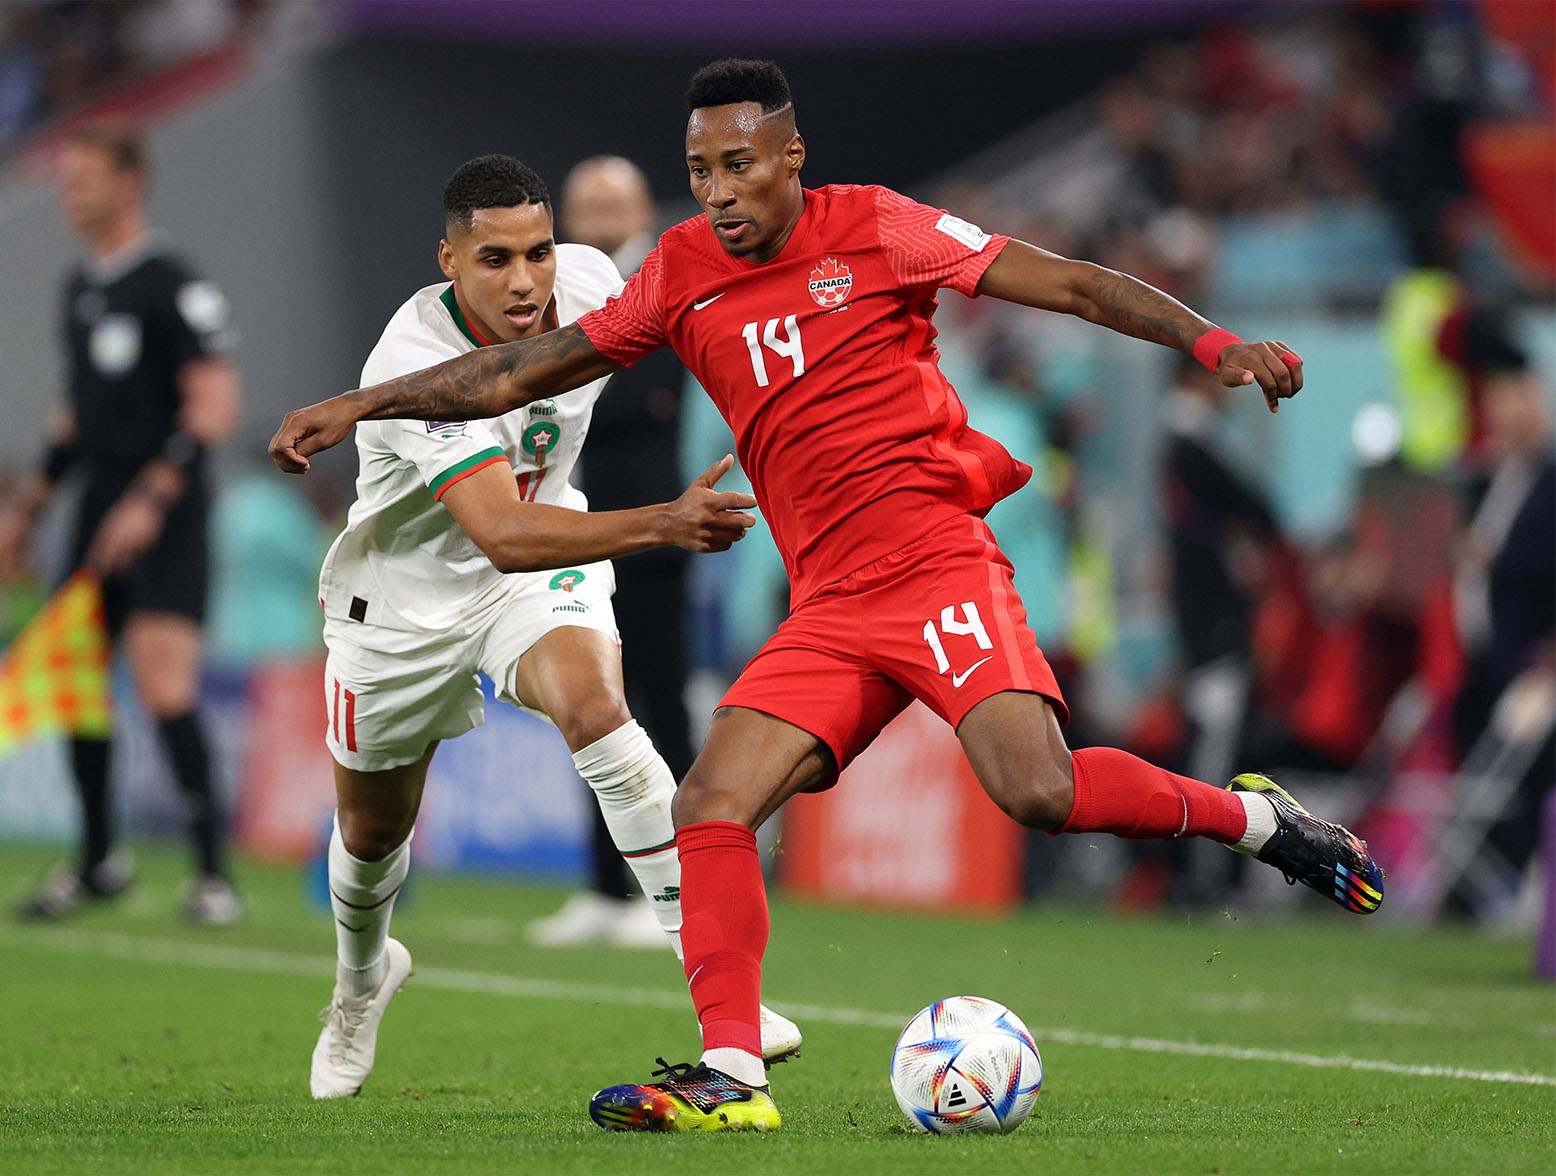 DOHA, QATAR - DECEMBER 01: Mark-Anthony Kaye of Canada controls the ball whilst under pressure from Abdelhamid Sabiri of Morocco during the FIFA World Cup Qatar 2022 Group F match between Canada and Morocco at Al Thumama Stadium on December 01, 2022 in Doha, Qatar. (Photo by Richard Heathcote/Getty Images)